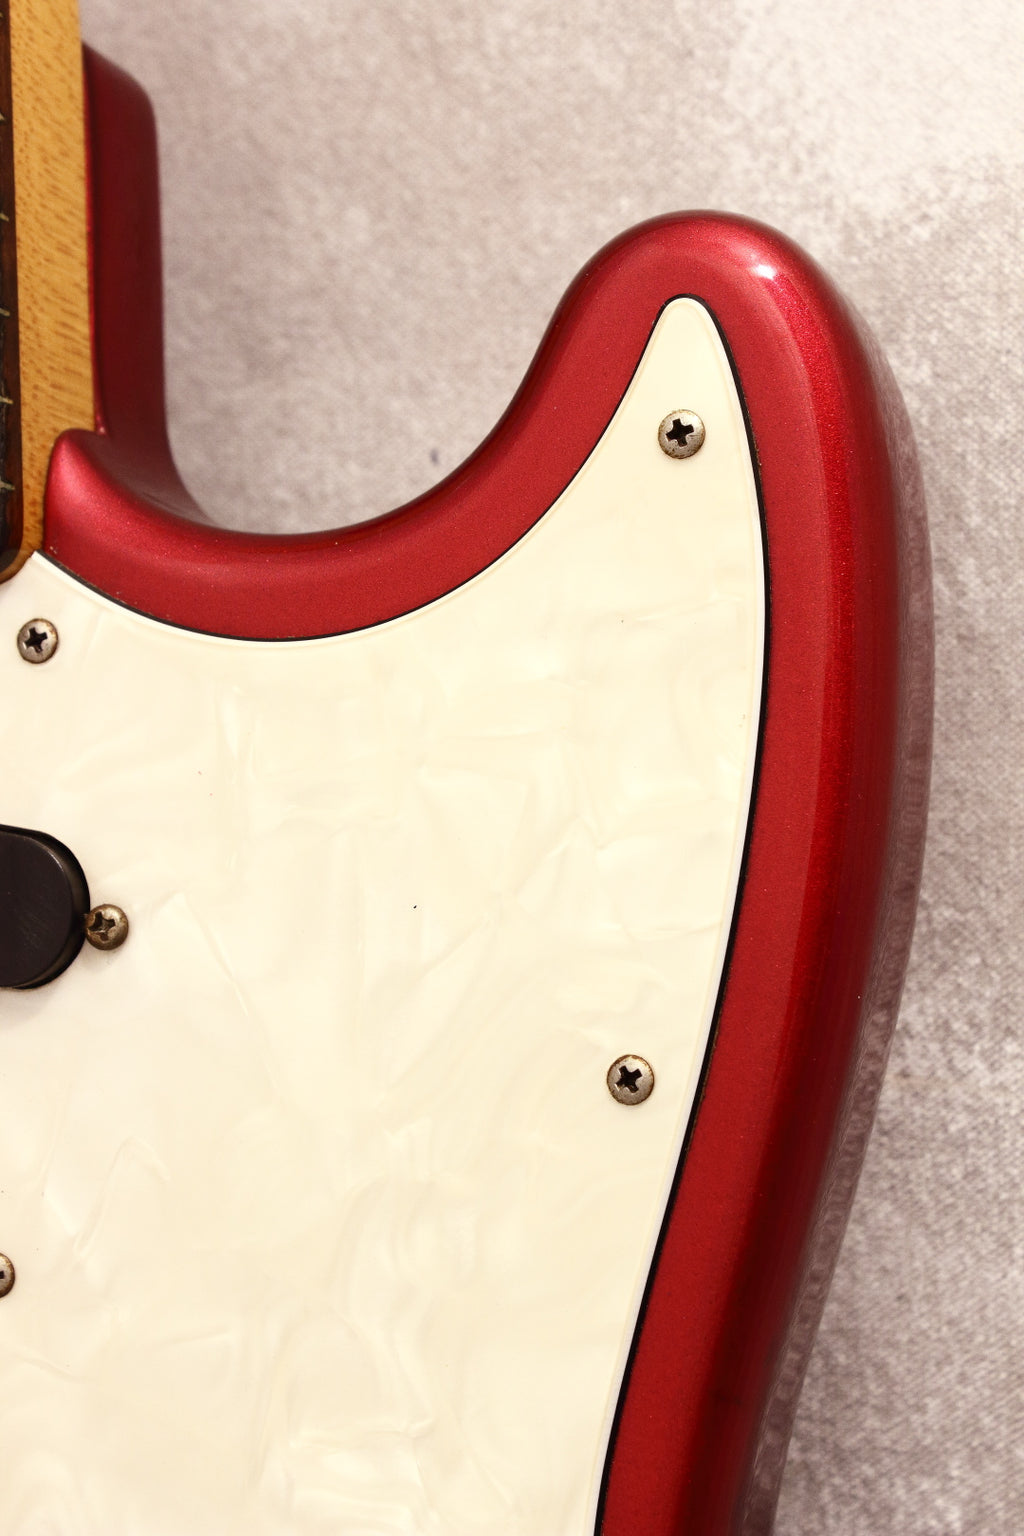 Fender Japan '66 Mustang MG66-65 Candy Apple Red 1996